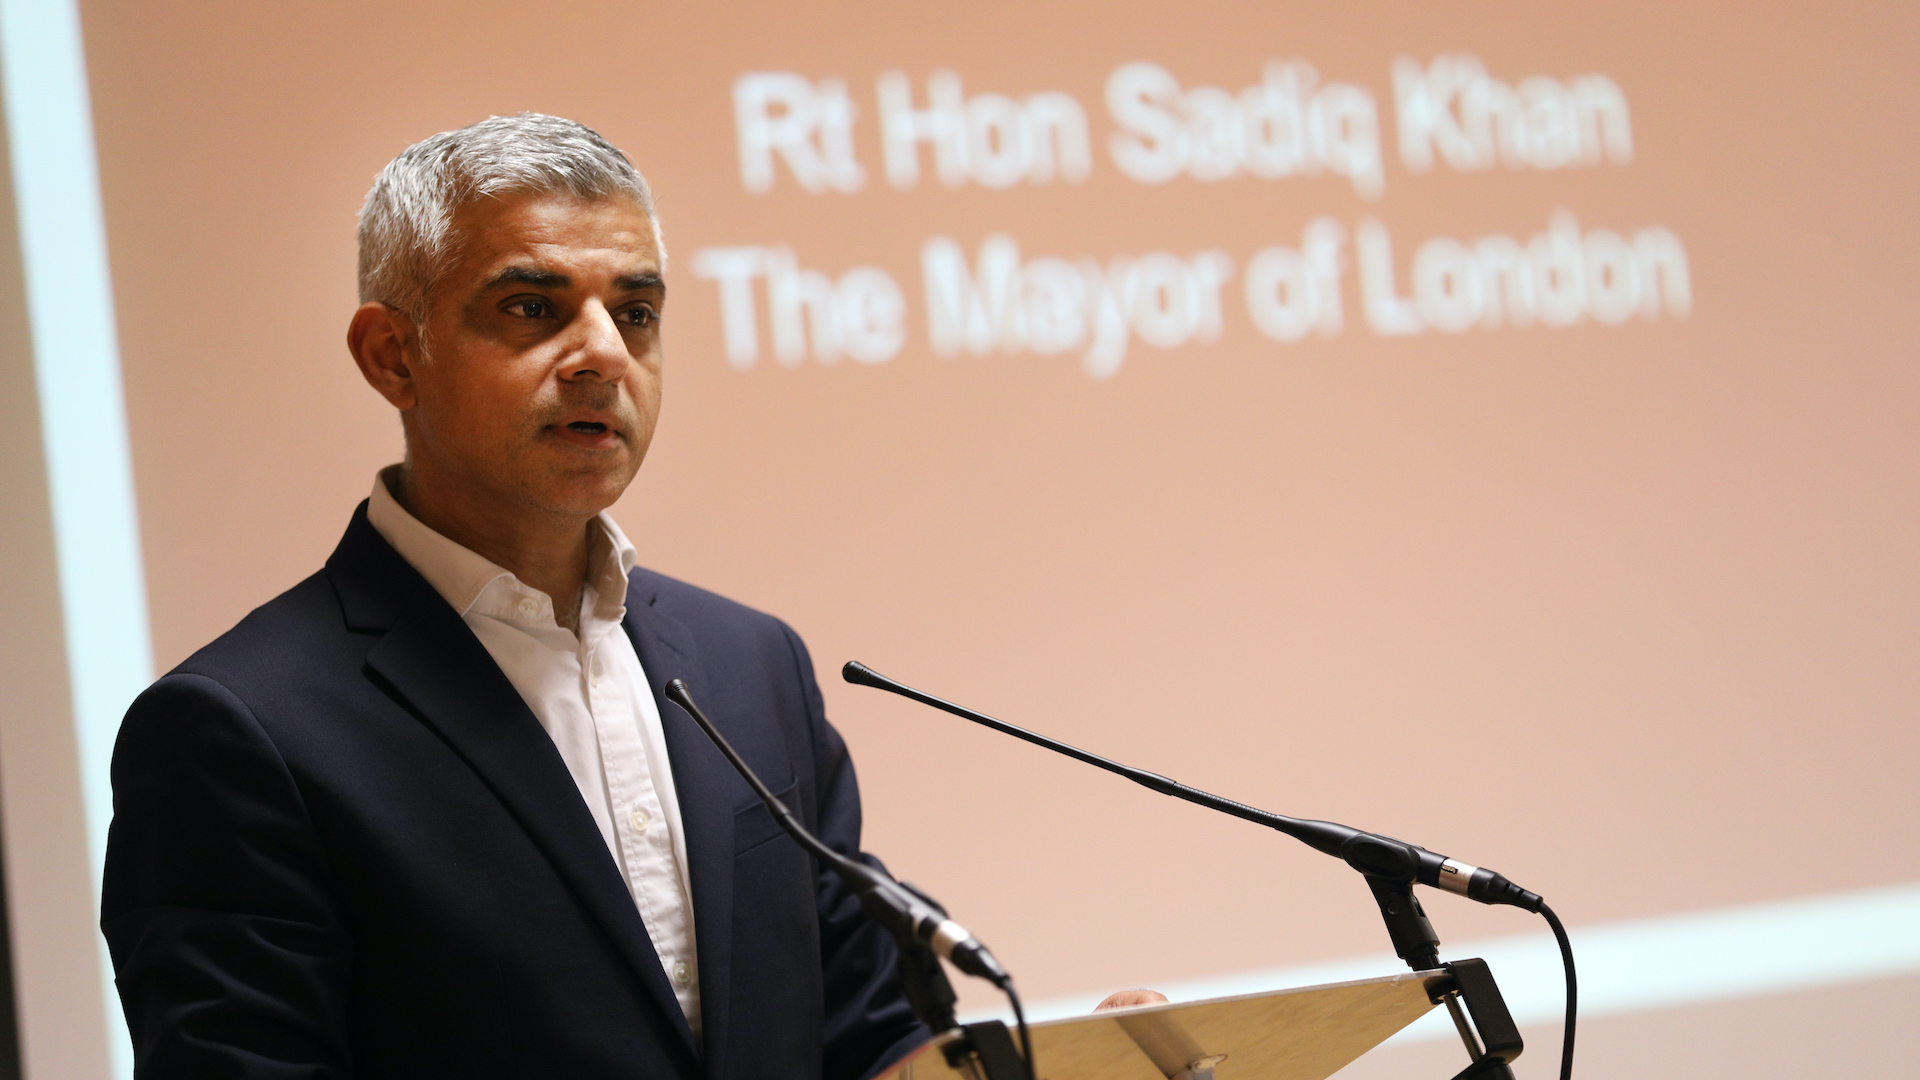 Mayor of London Sadiq Khan attends the East London Mosque in 2017